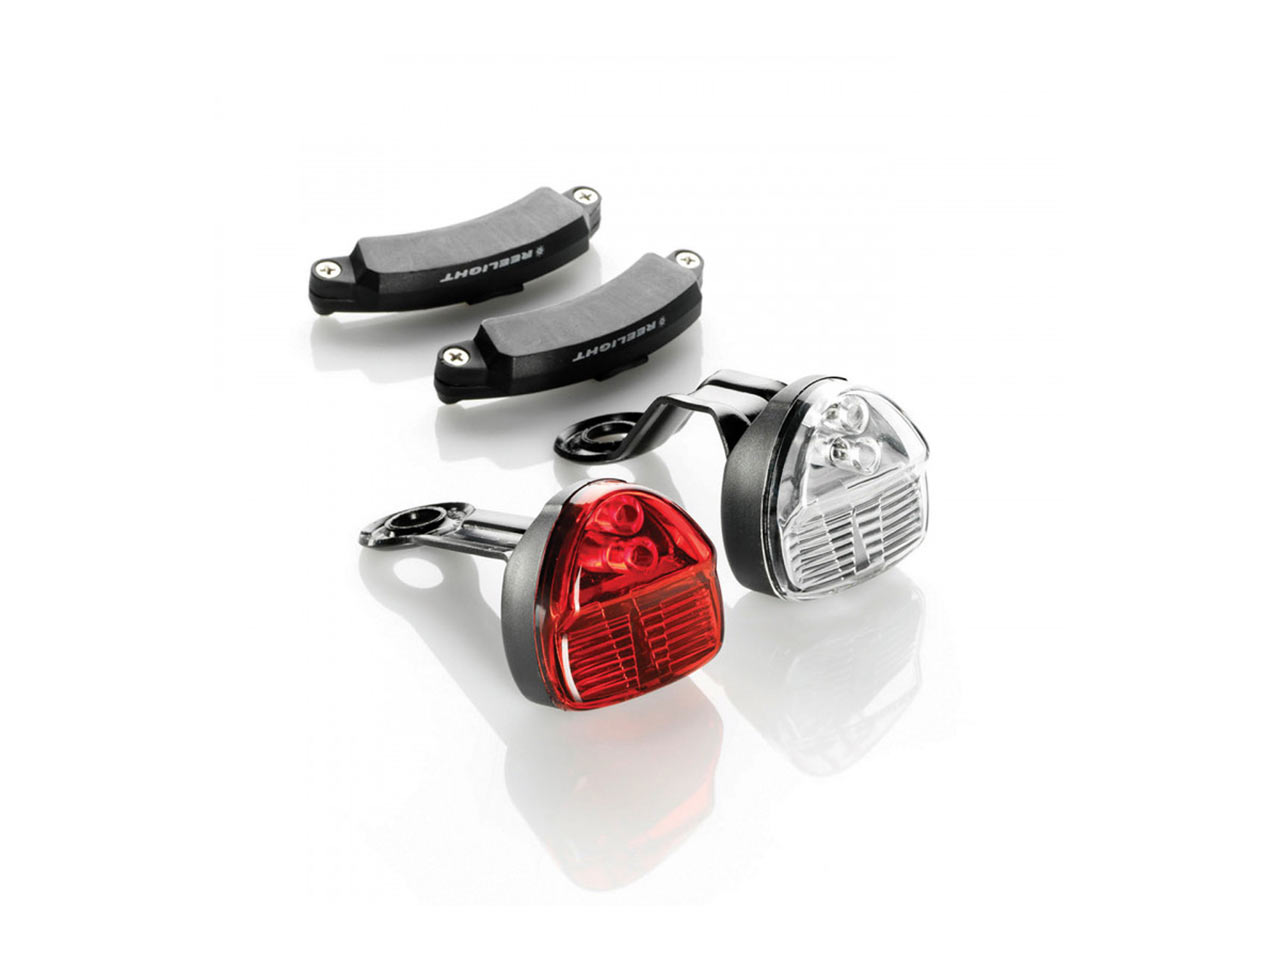 Reelight SL150 Steady Compact Front & Rear Magnet Lights